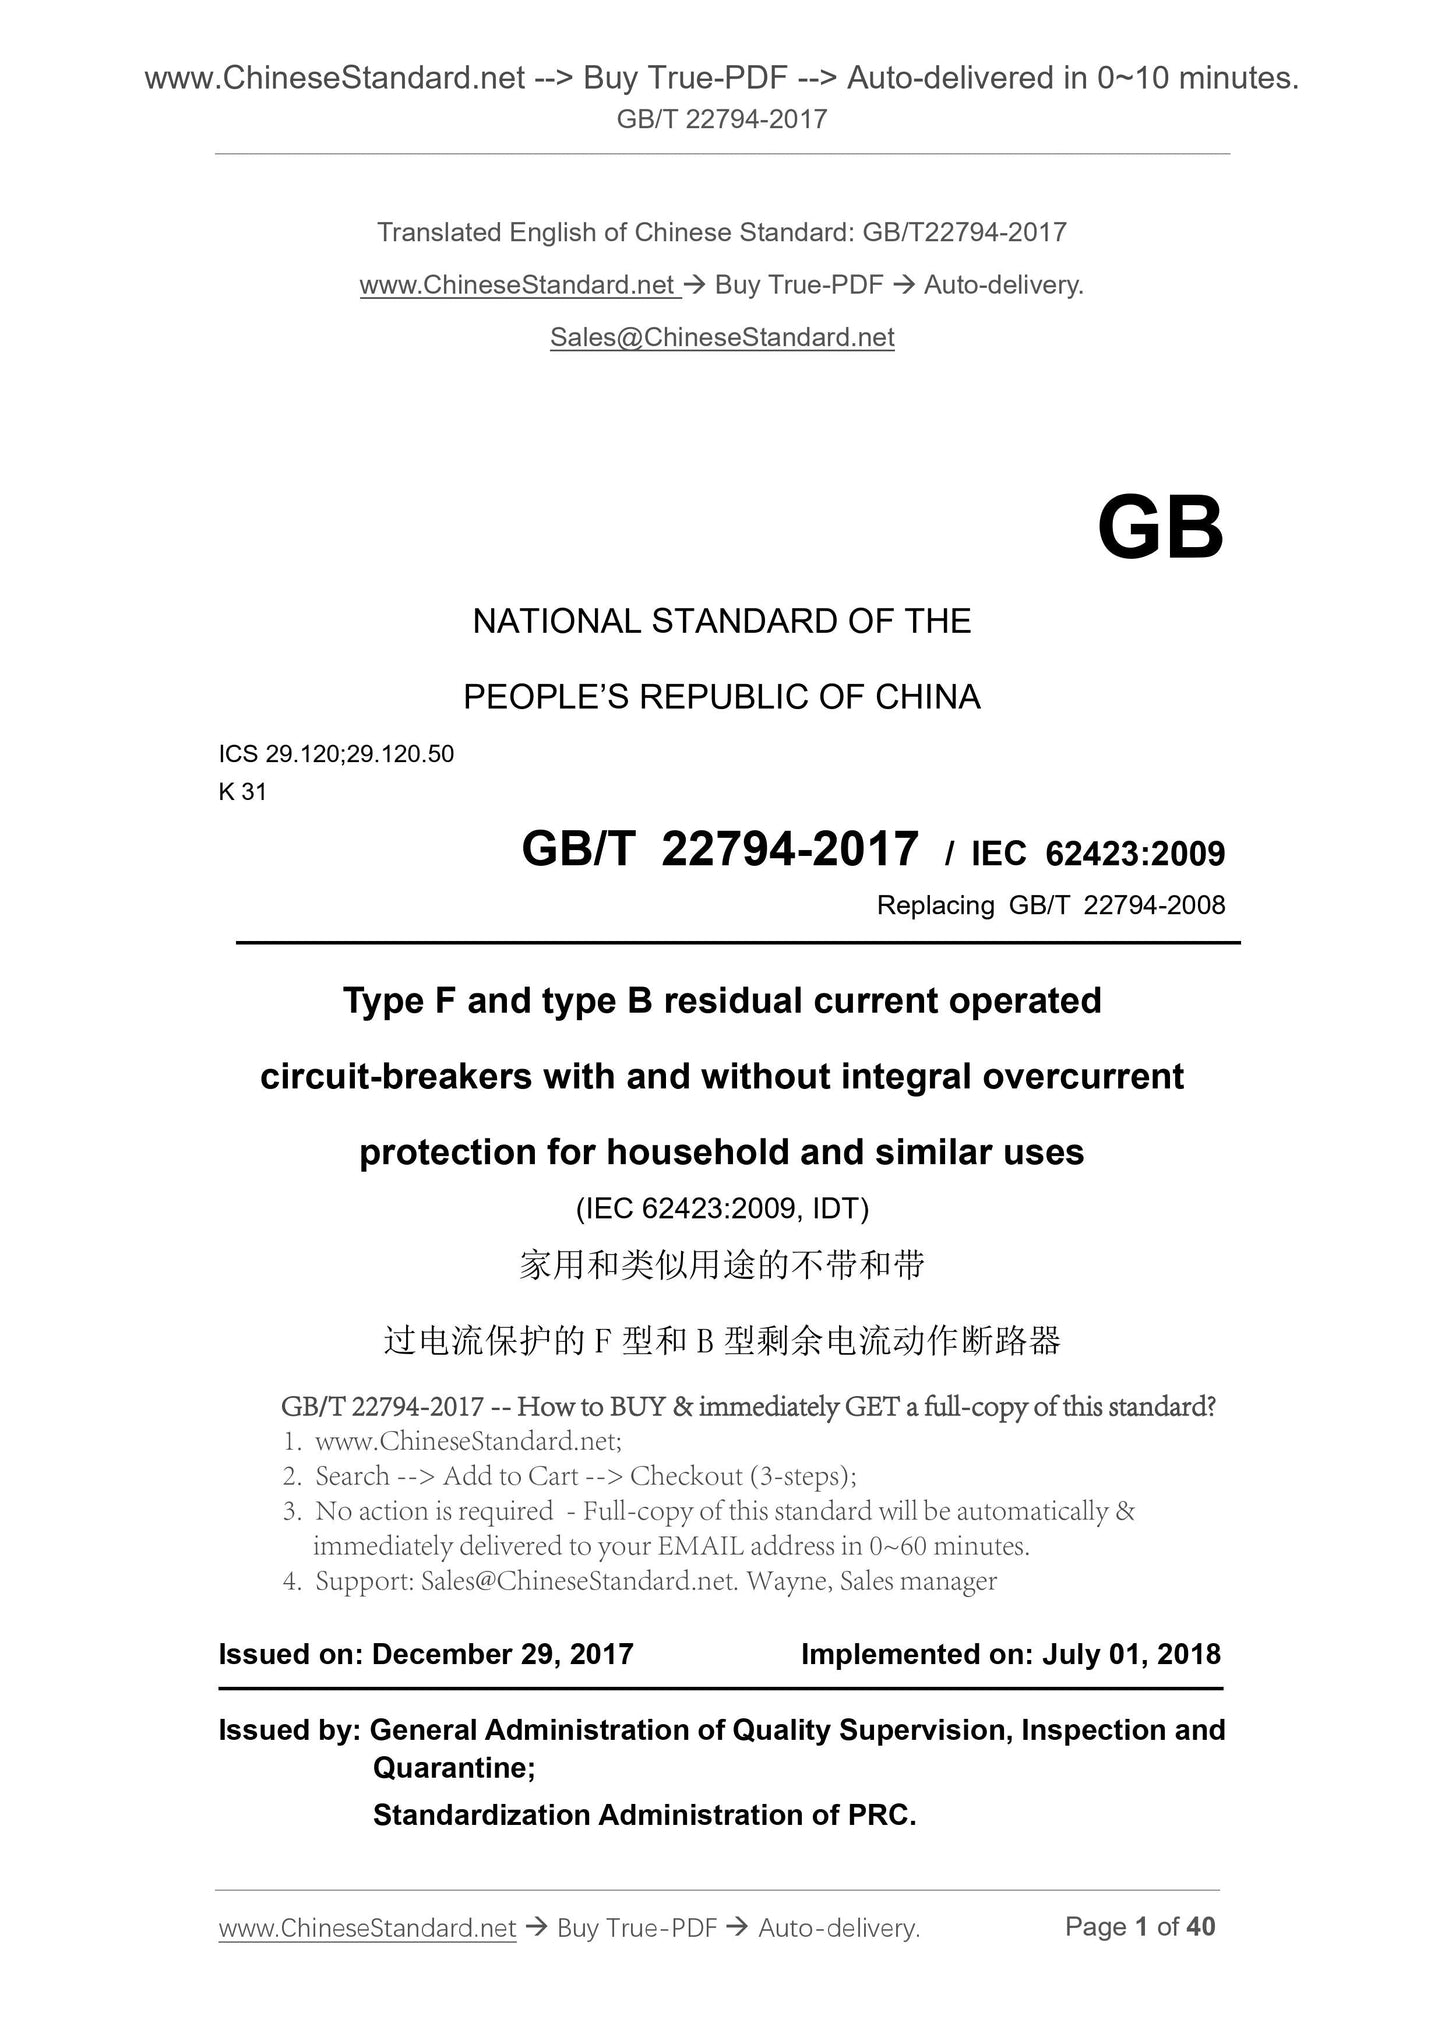 GB/T 22794-2017 Page 1